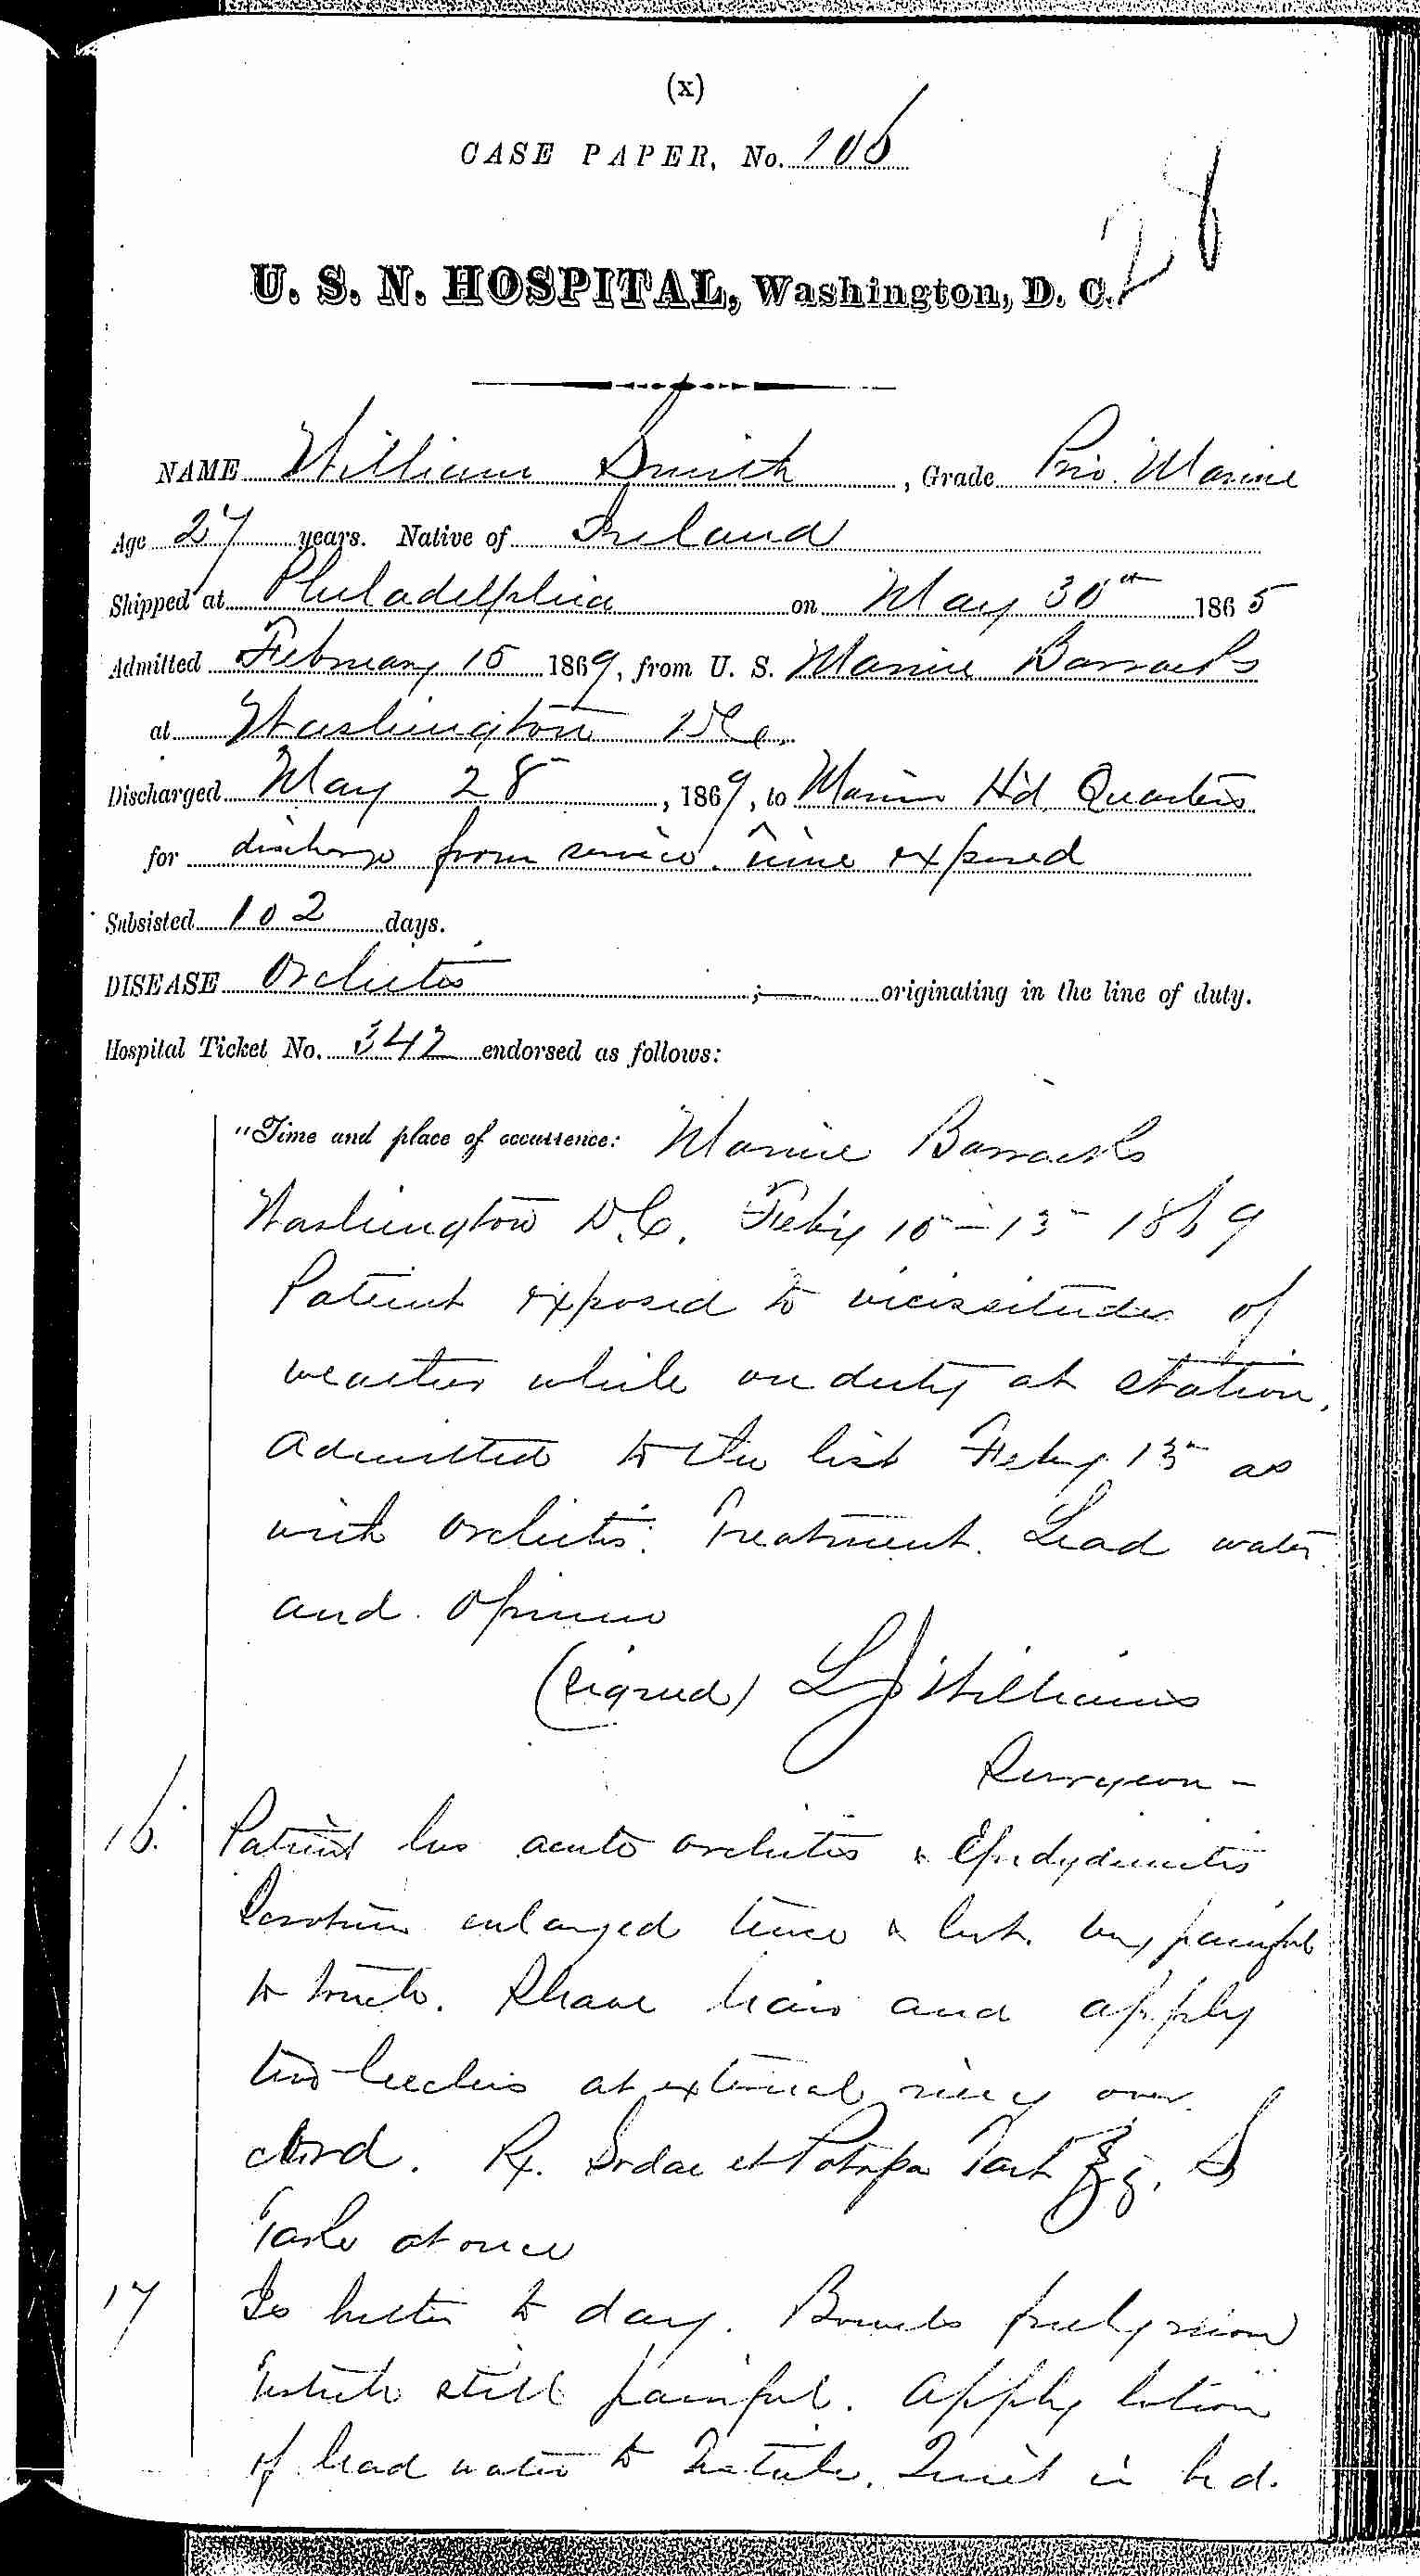 Entry for William Smith (page 1 of 3) in the log Hospital Tickets and Case Papers - Naval Hospital - Washington, D.C. - 1868-69